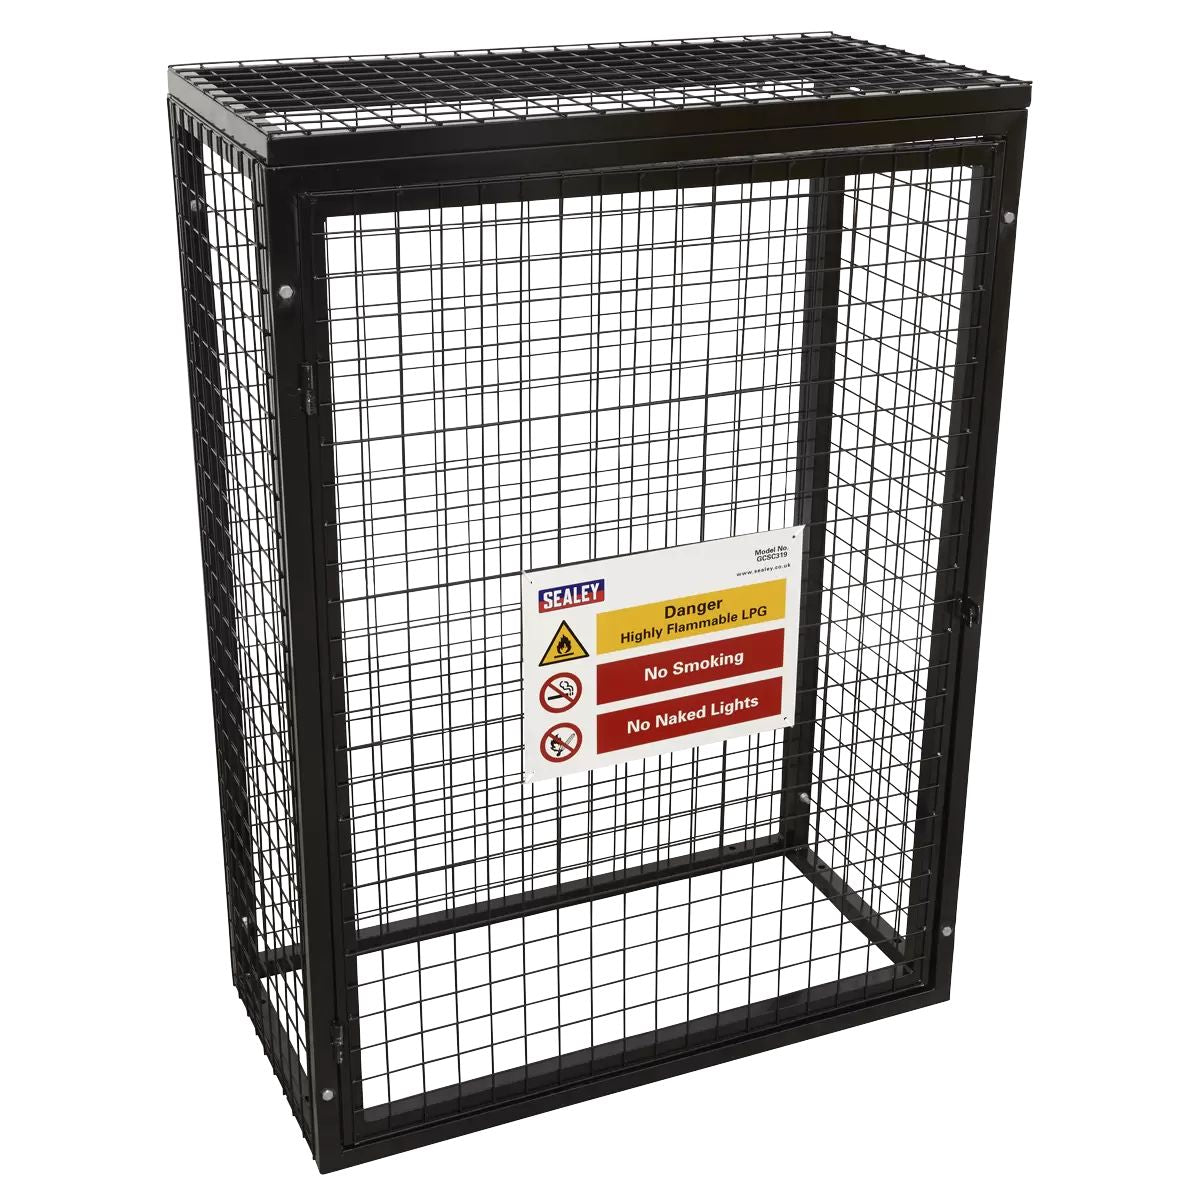 Sealey GCSC319 Gas Cylinder Safety Cage